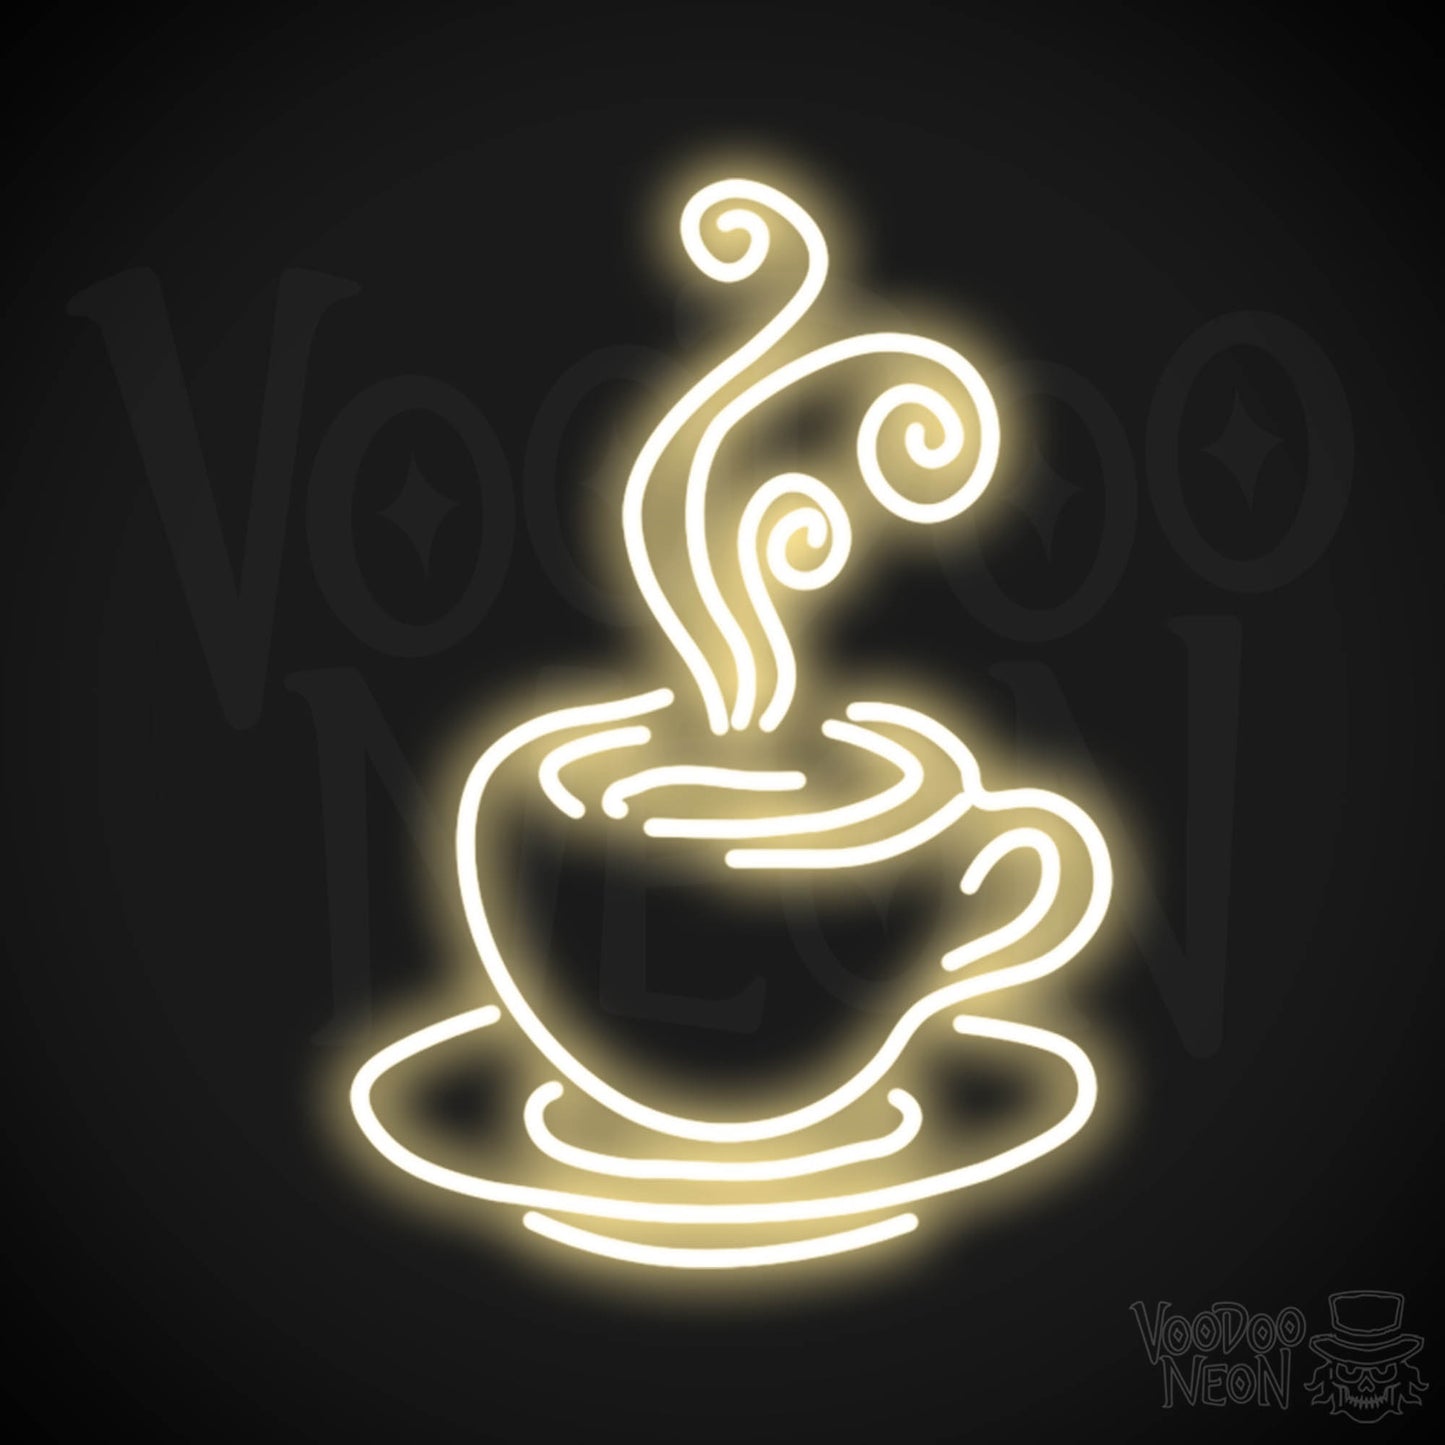 Steaming Coffee Cup Neon Sign - Coffee Cup Sign - Neon Coffee Cup Wall Art - Color Warm White